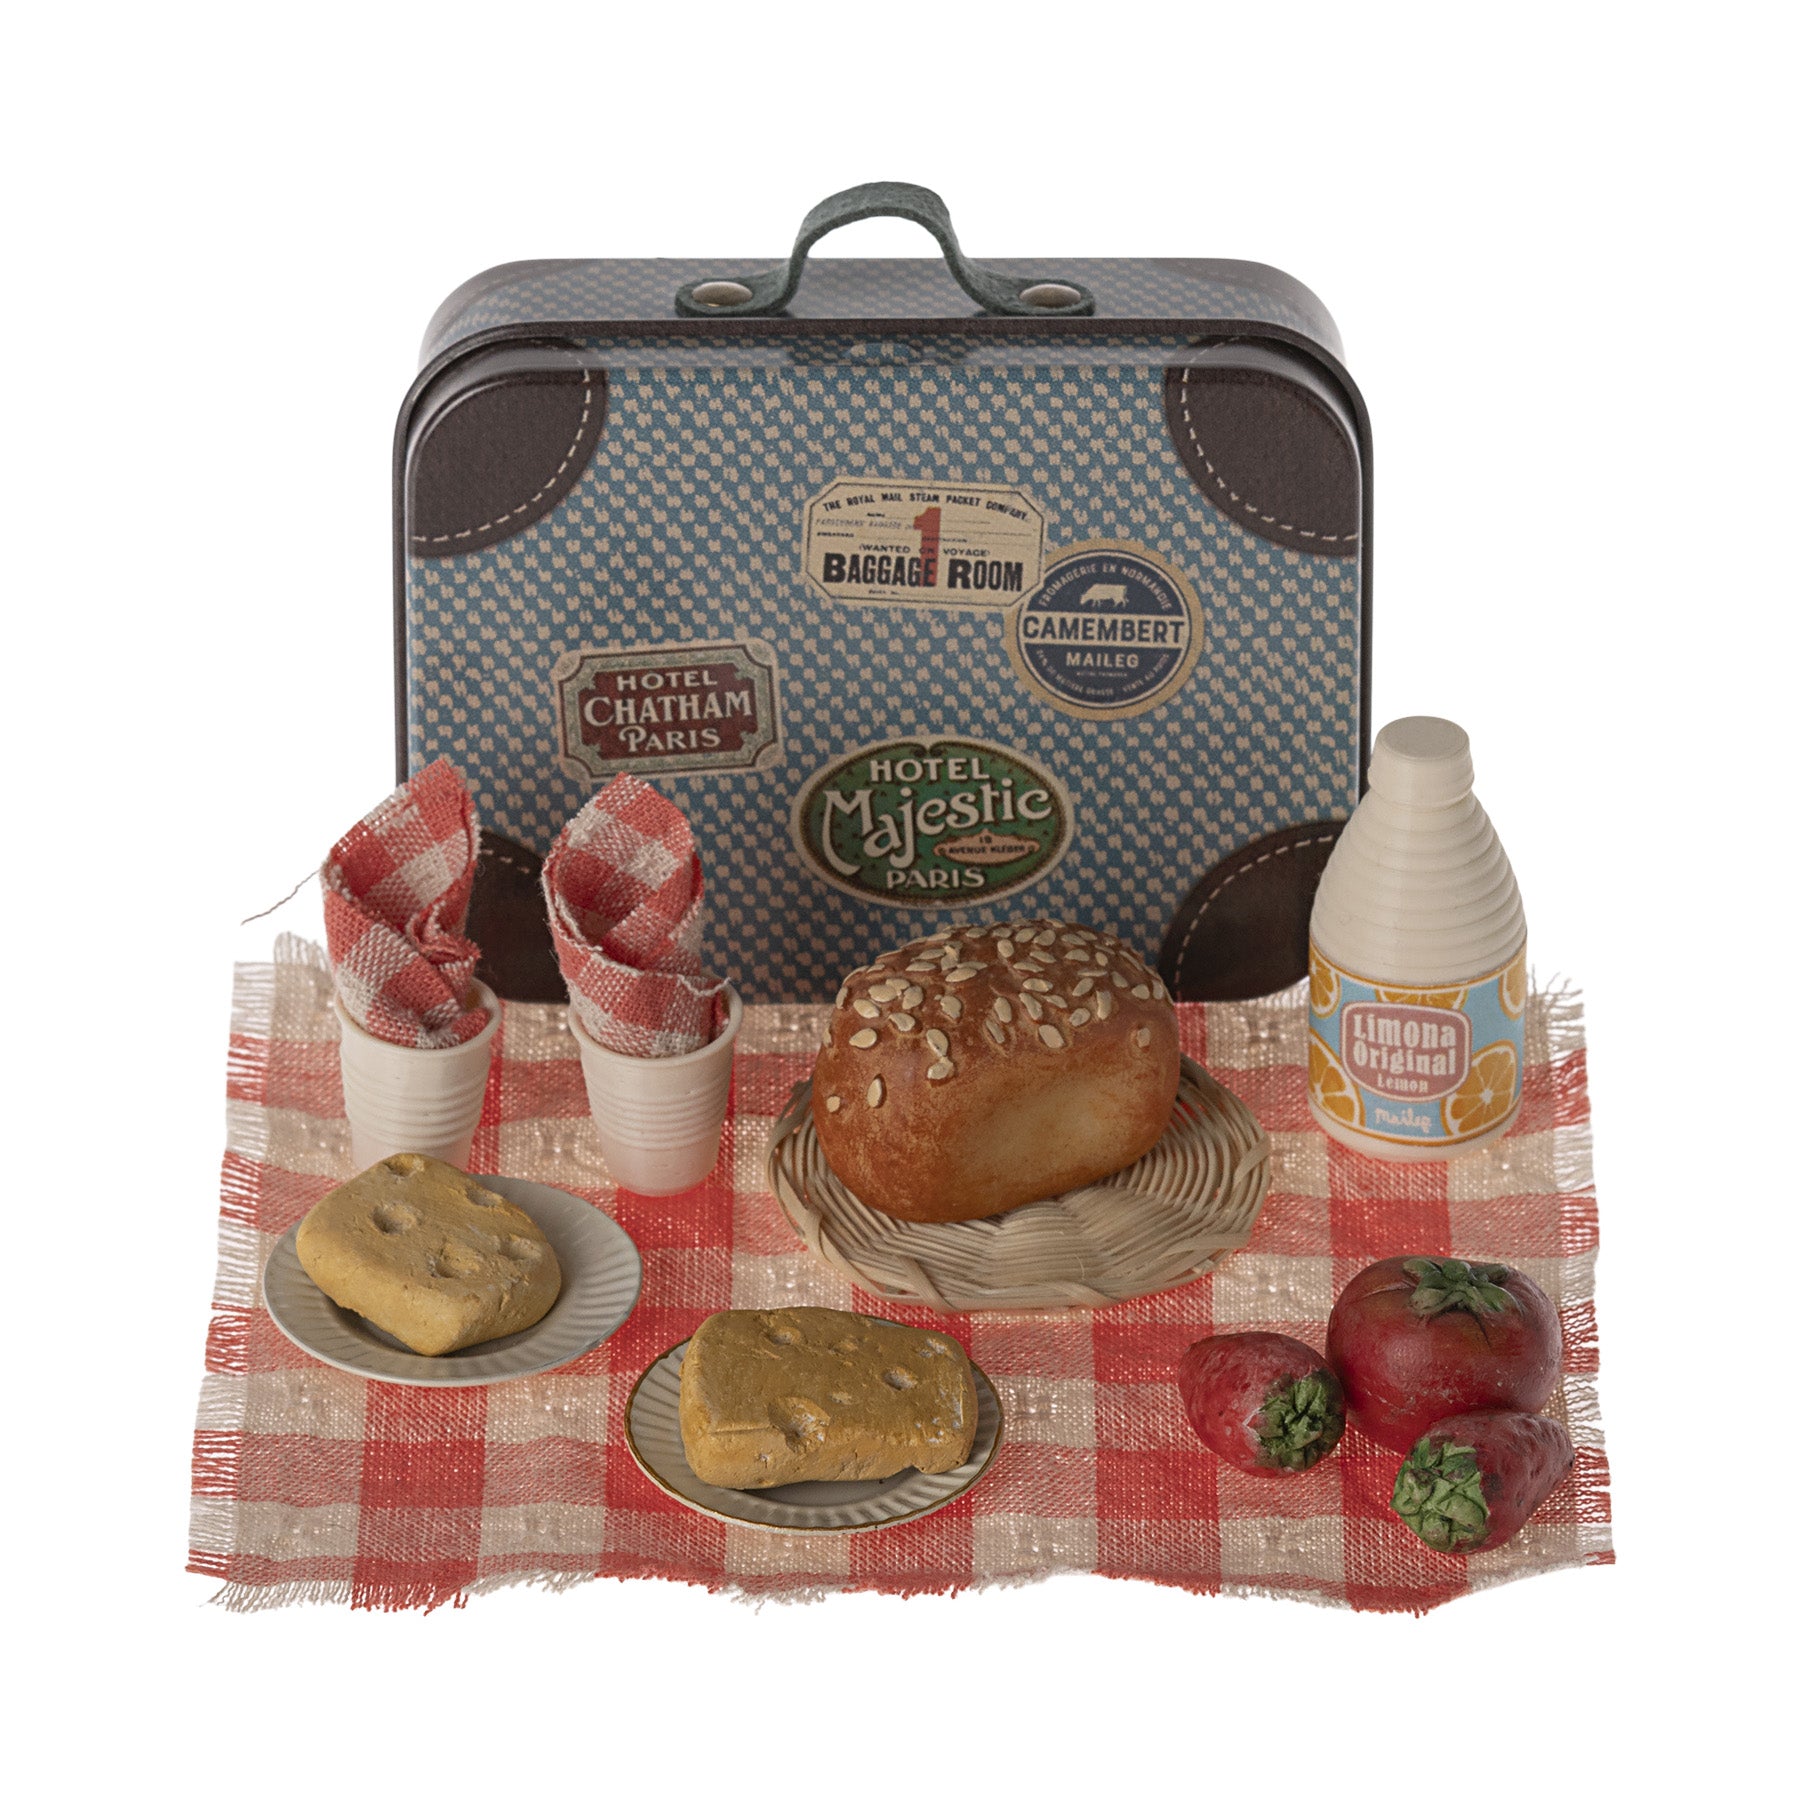 maileg picnic set with a table clothe and food set out on it